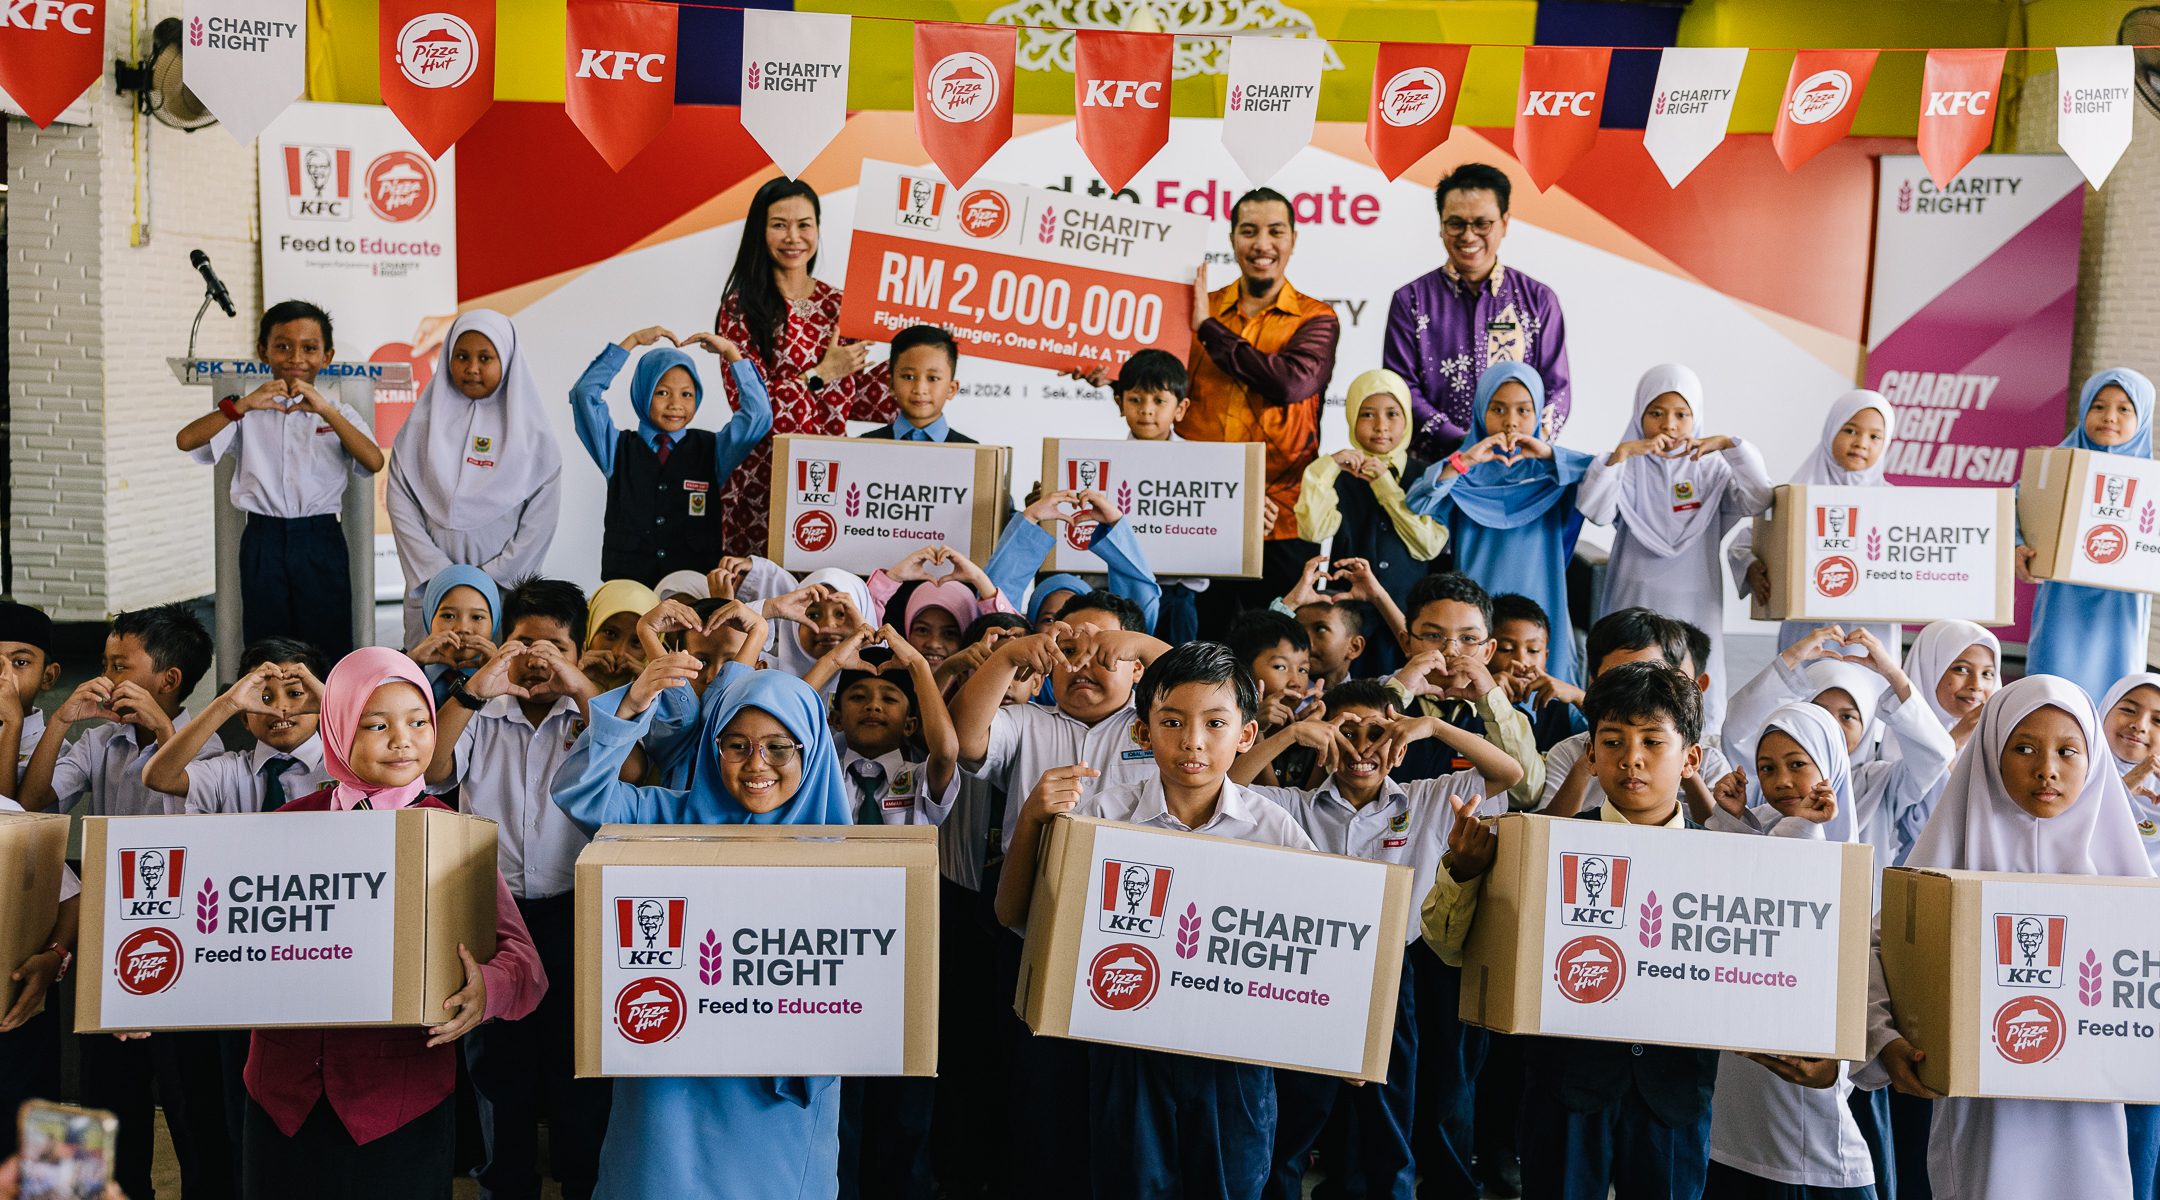 Group photo with students of SK Taman Medan during the launch of KFC and Pizza Hut's Feed to Educate program.